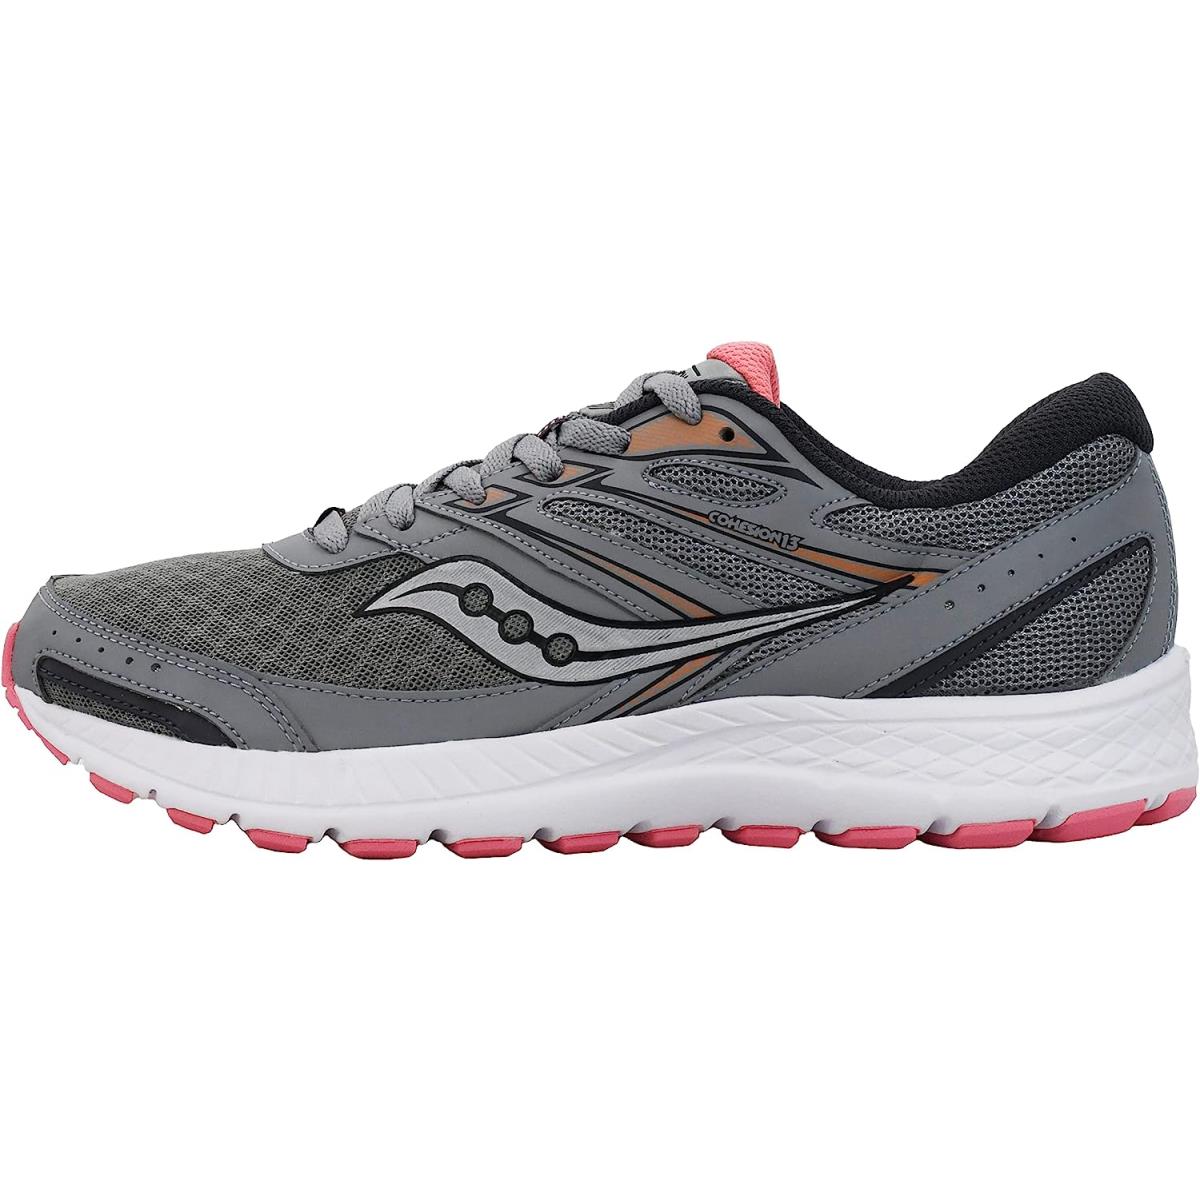 Saucony Women`s Cohesion 13 Running Shoe Grey/Pink